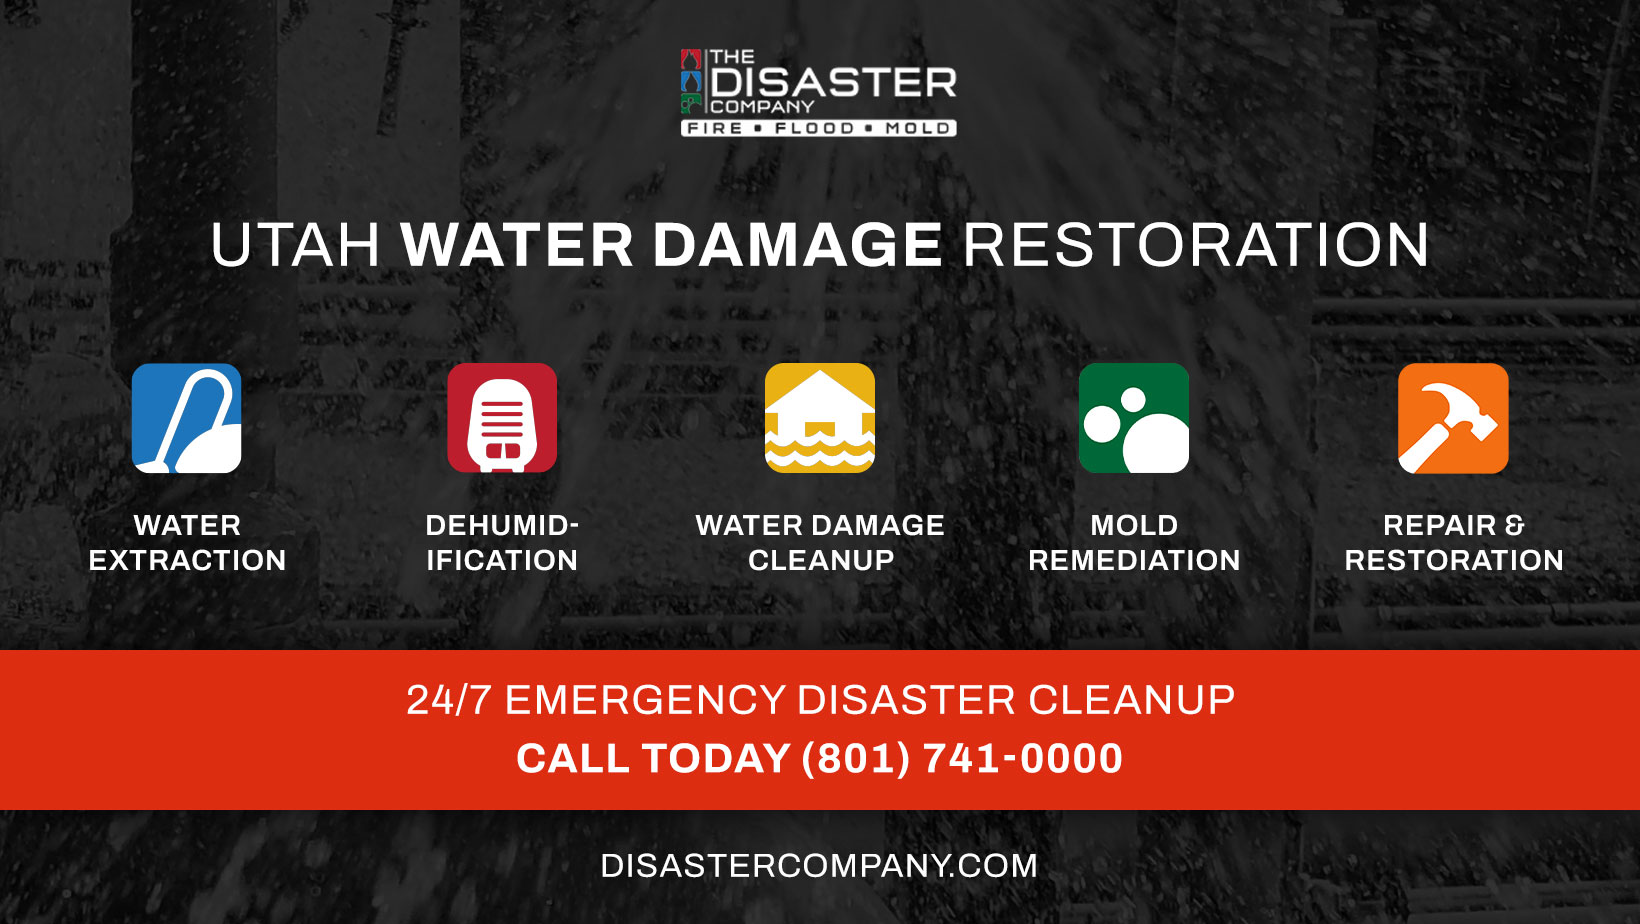 Illustration with the text: Utah Water Damage Restoration - Water Extraction, Dehumidification, Water Damage Cleanup, Mold Remediation, Repair & Restoration